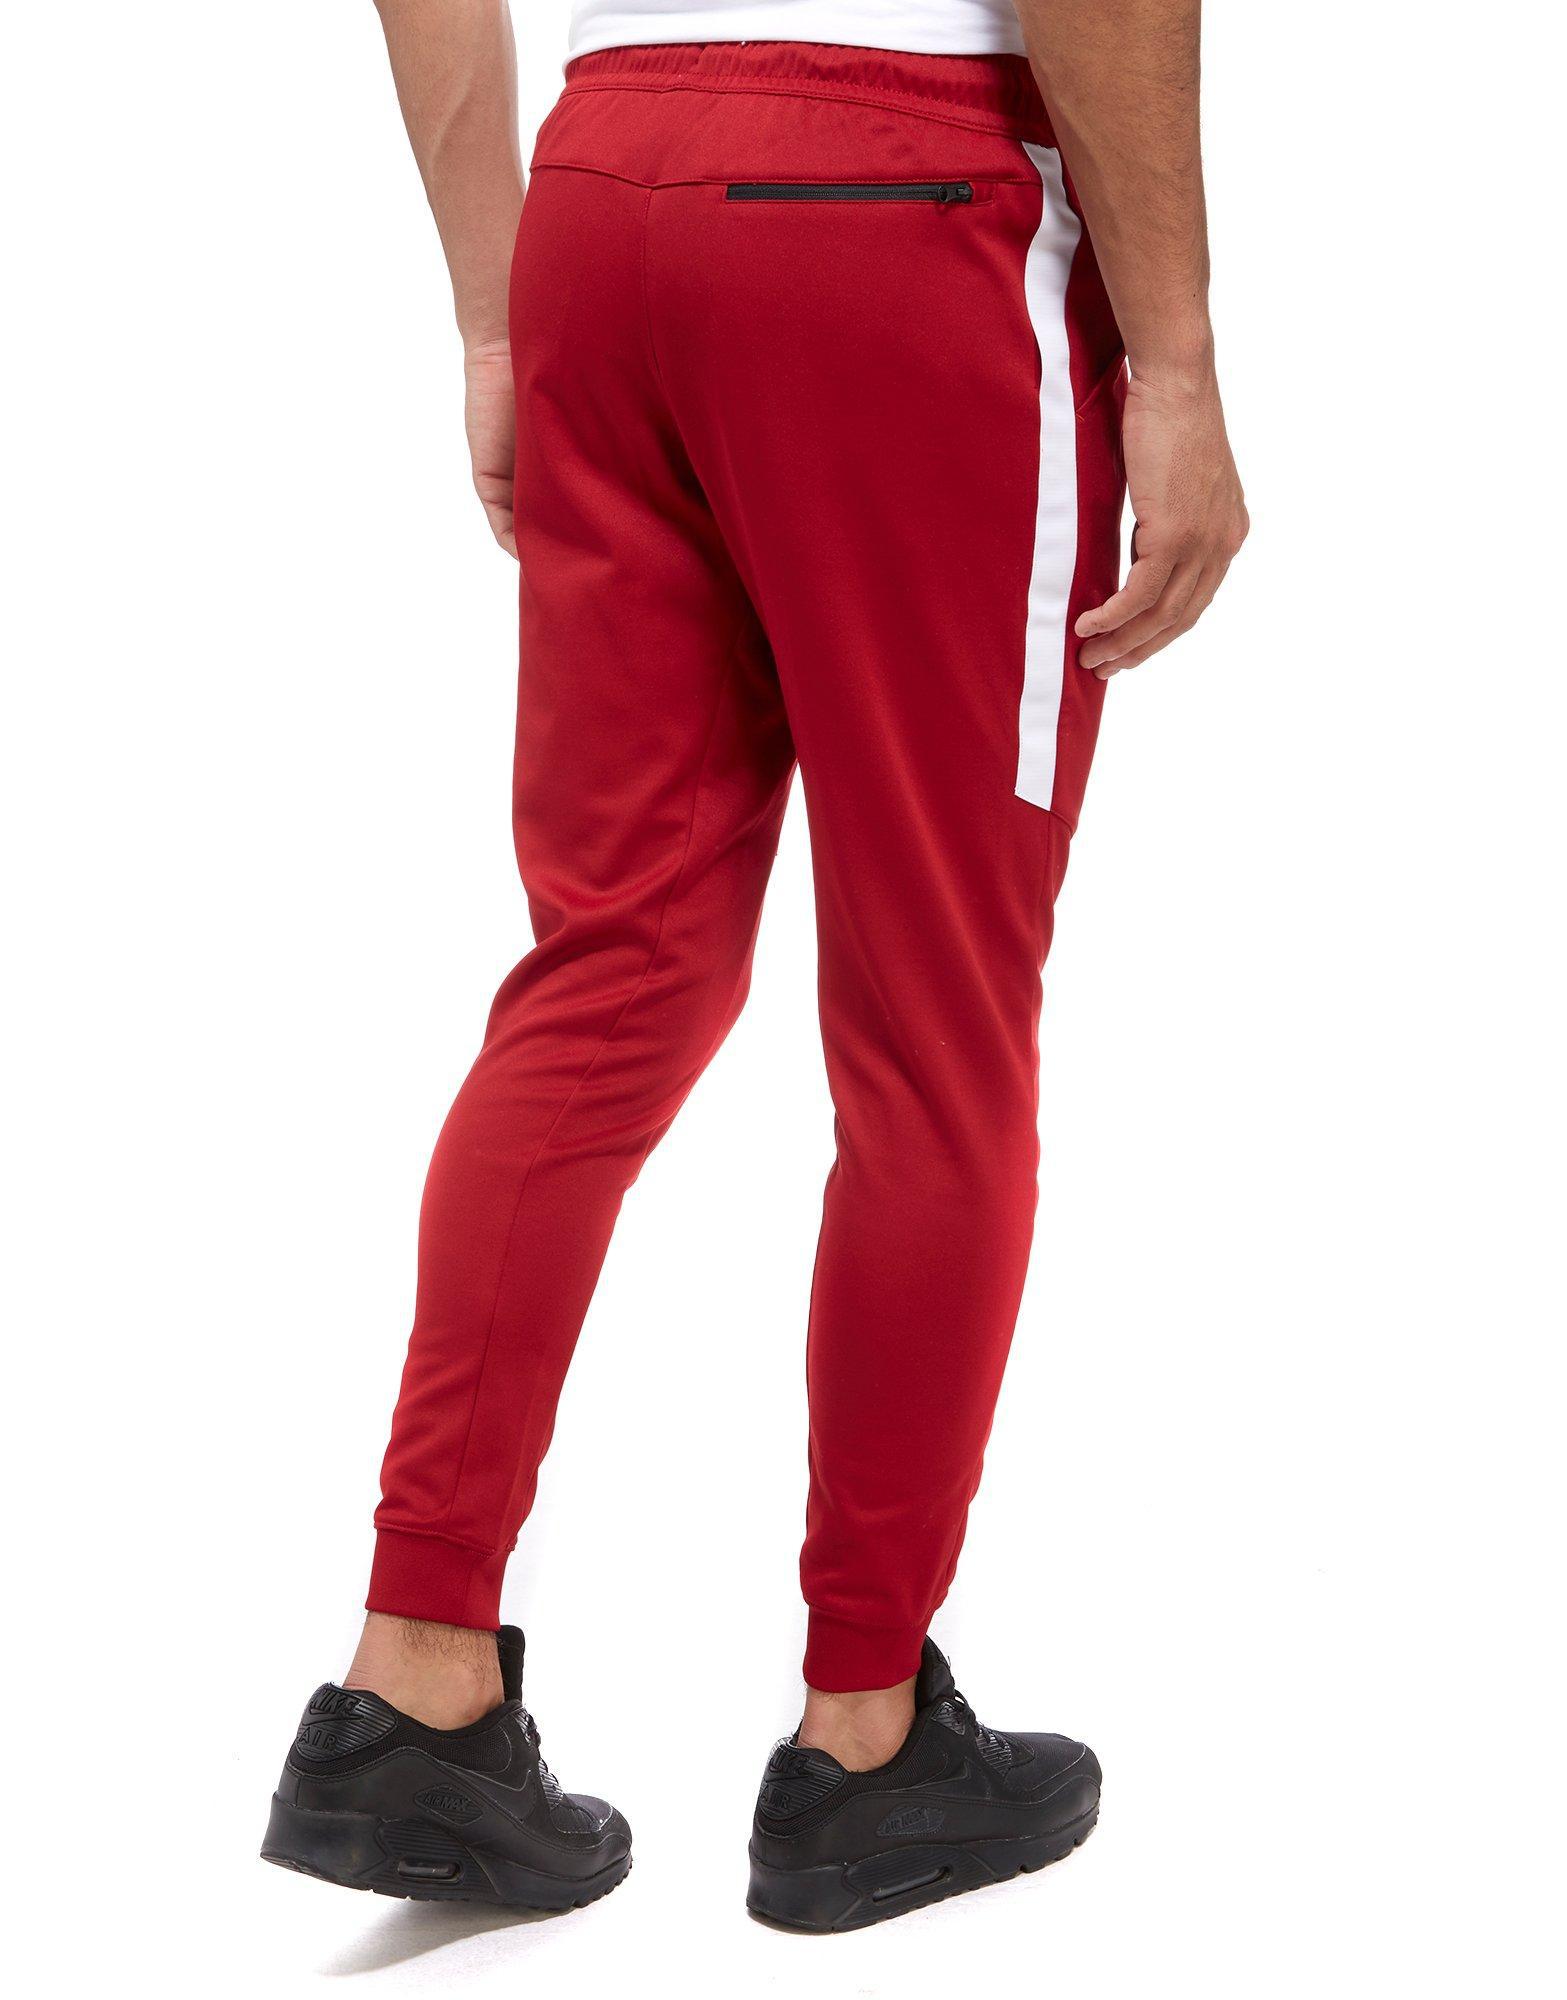 mens red nike track pants purchase 